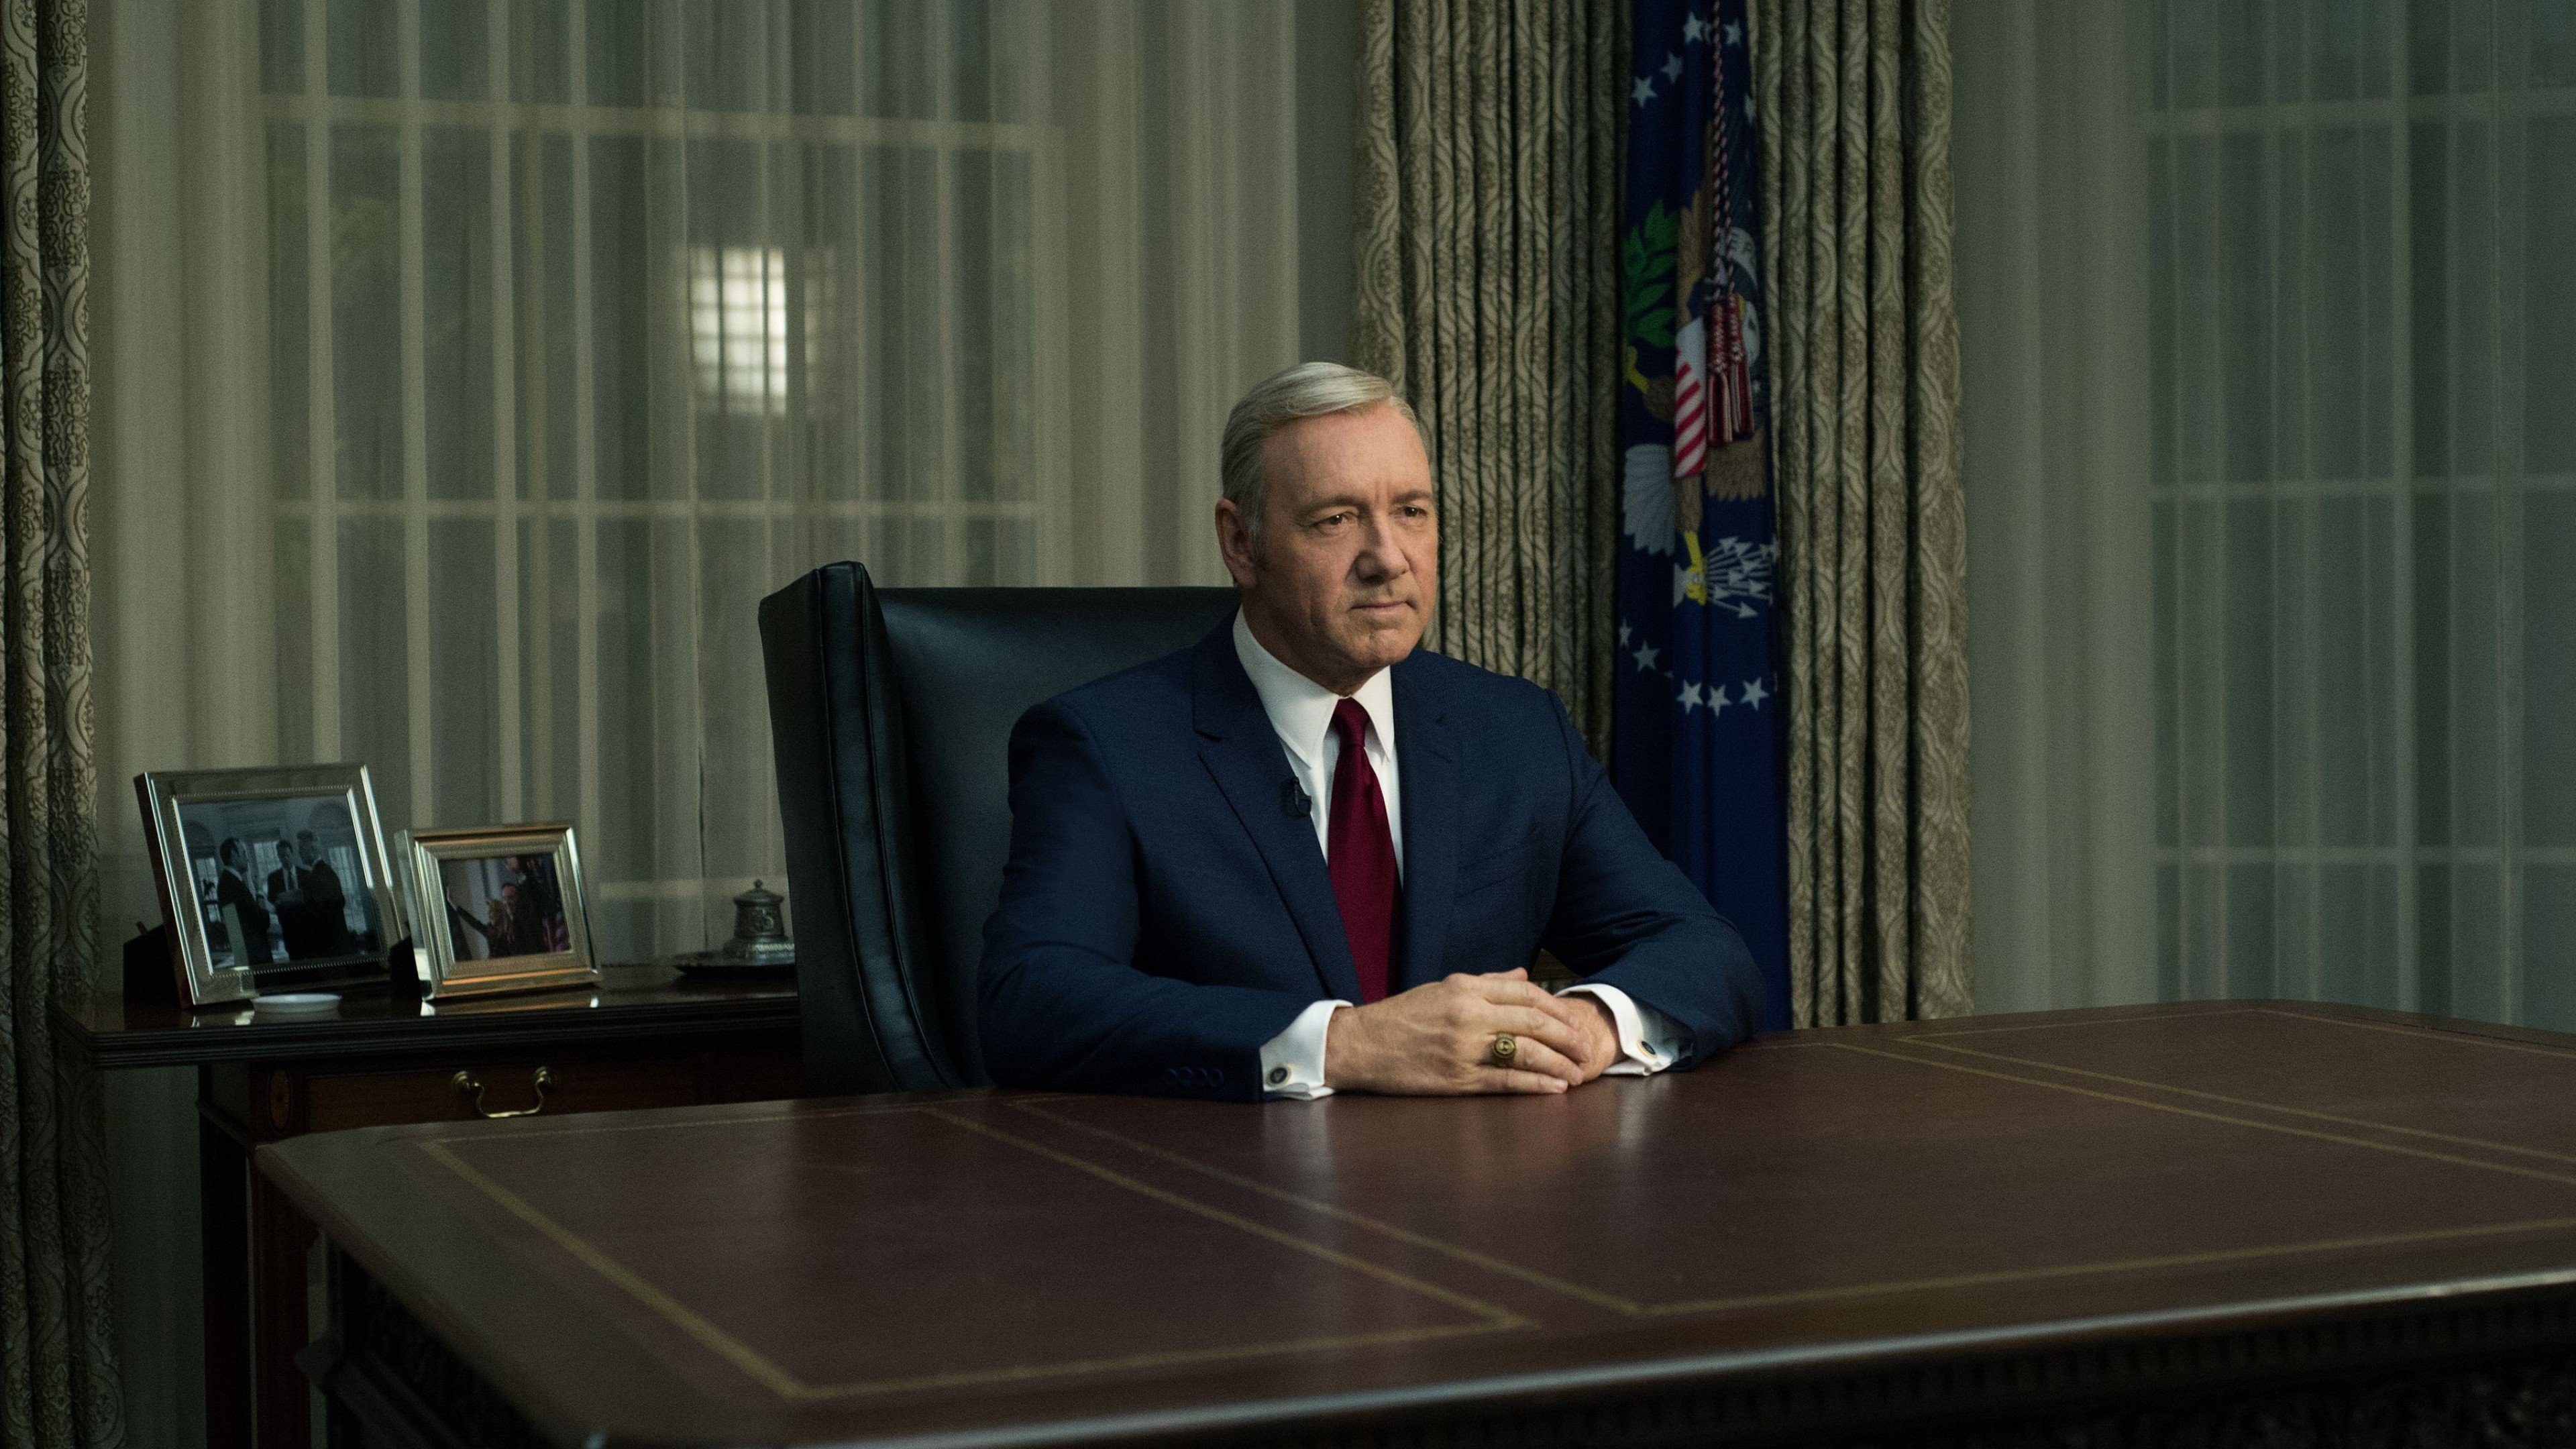 Wallpaper House of Cards, Best TV Series series, political